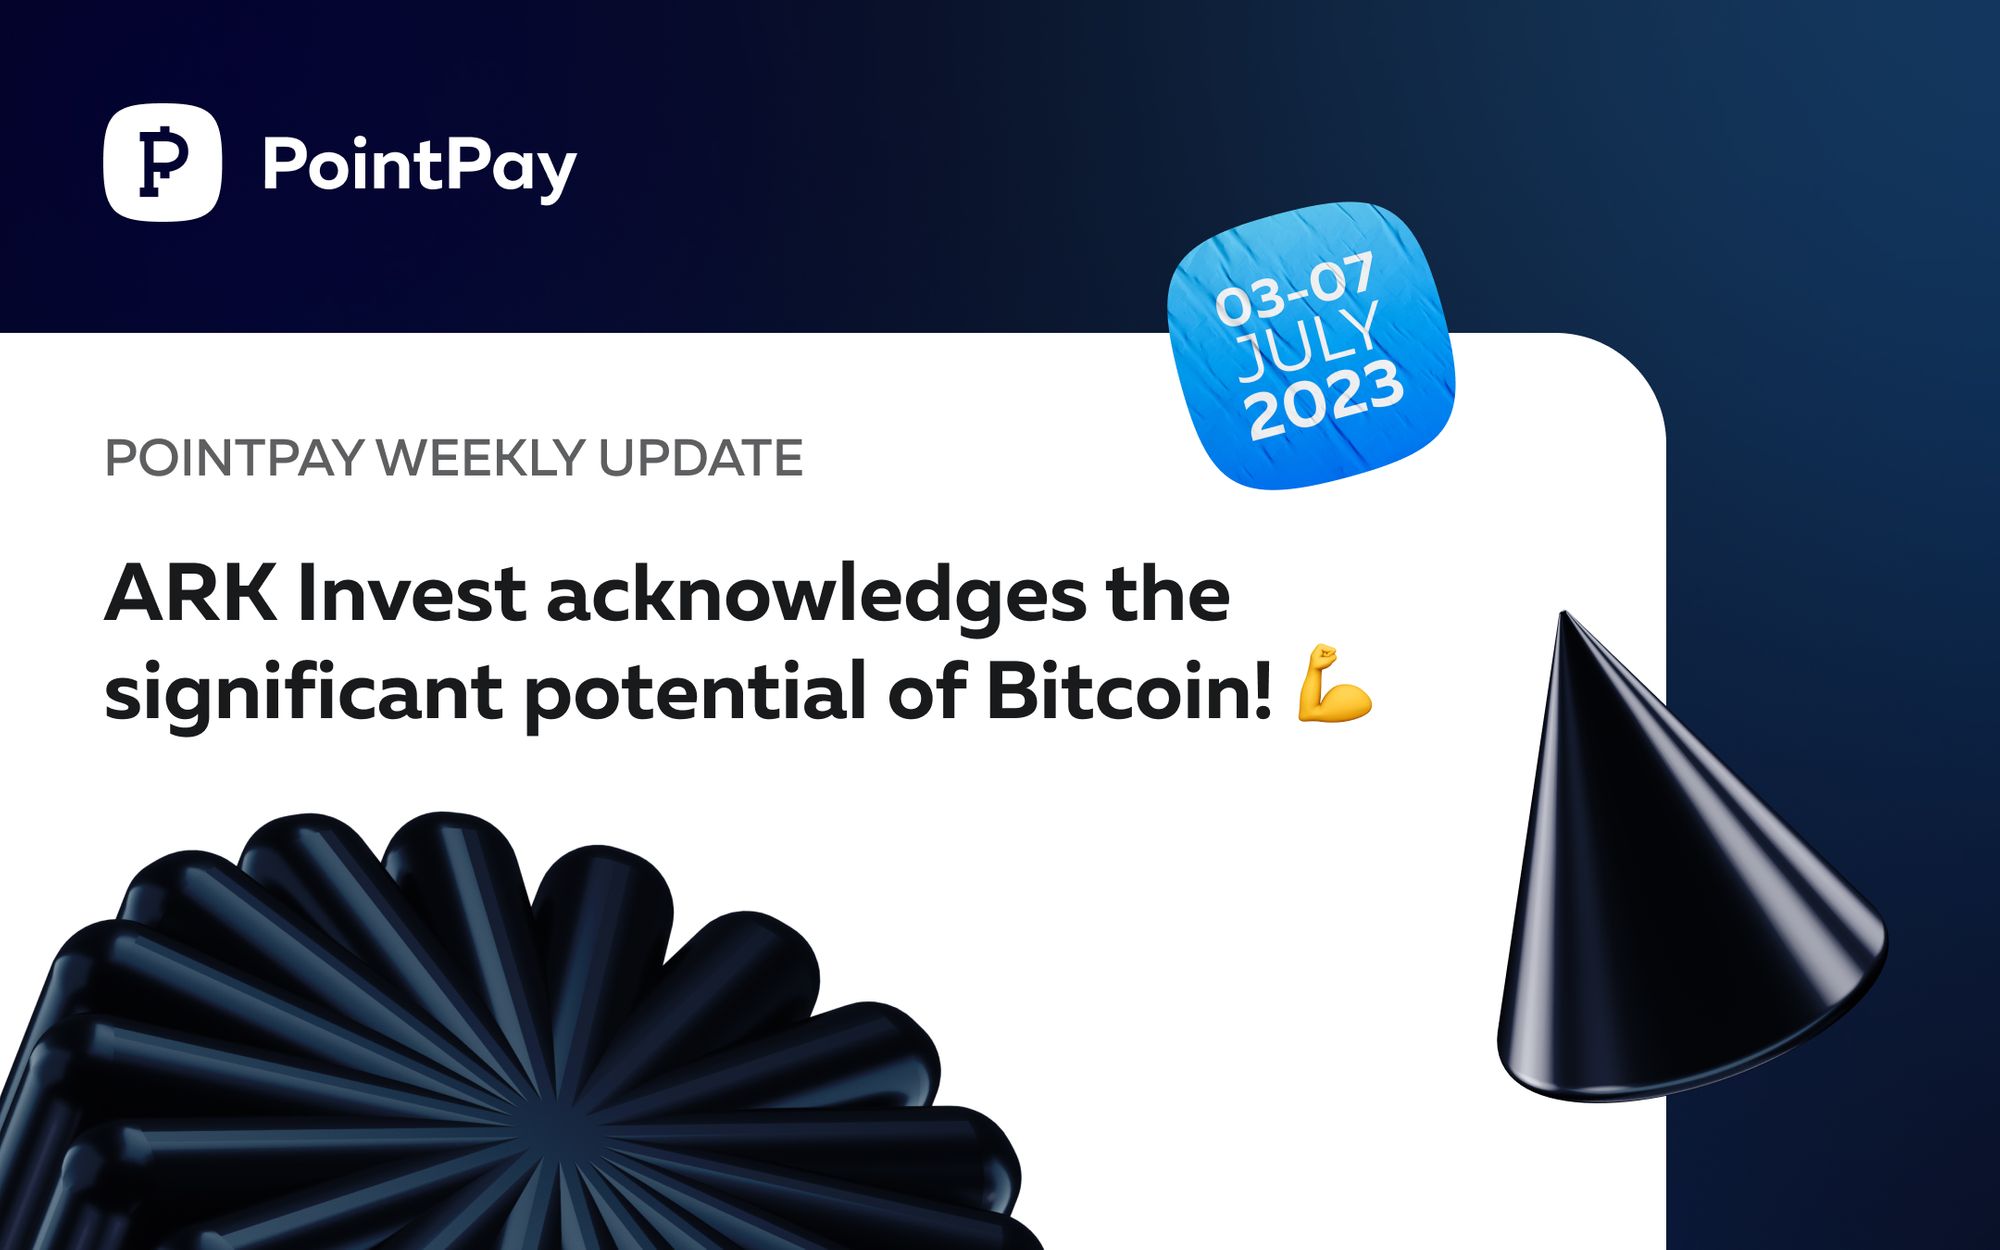 PointPay Weekly Update (3 - 7 July 2023)